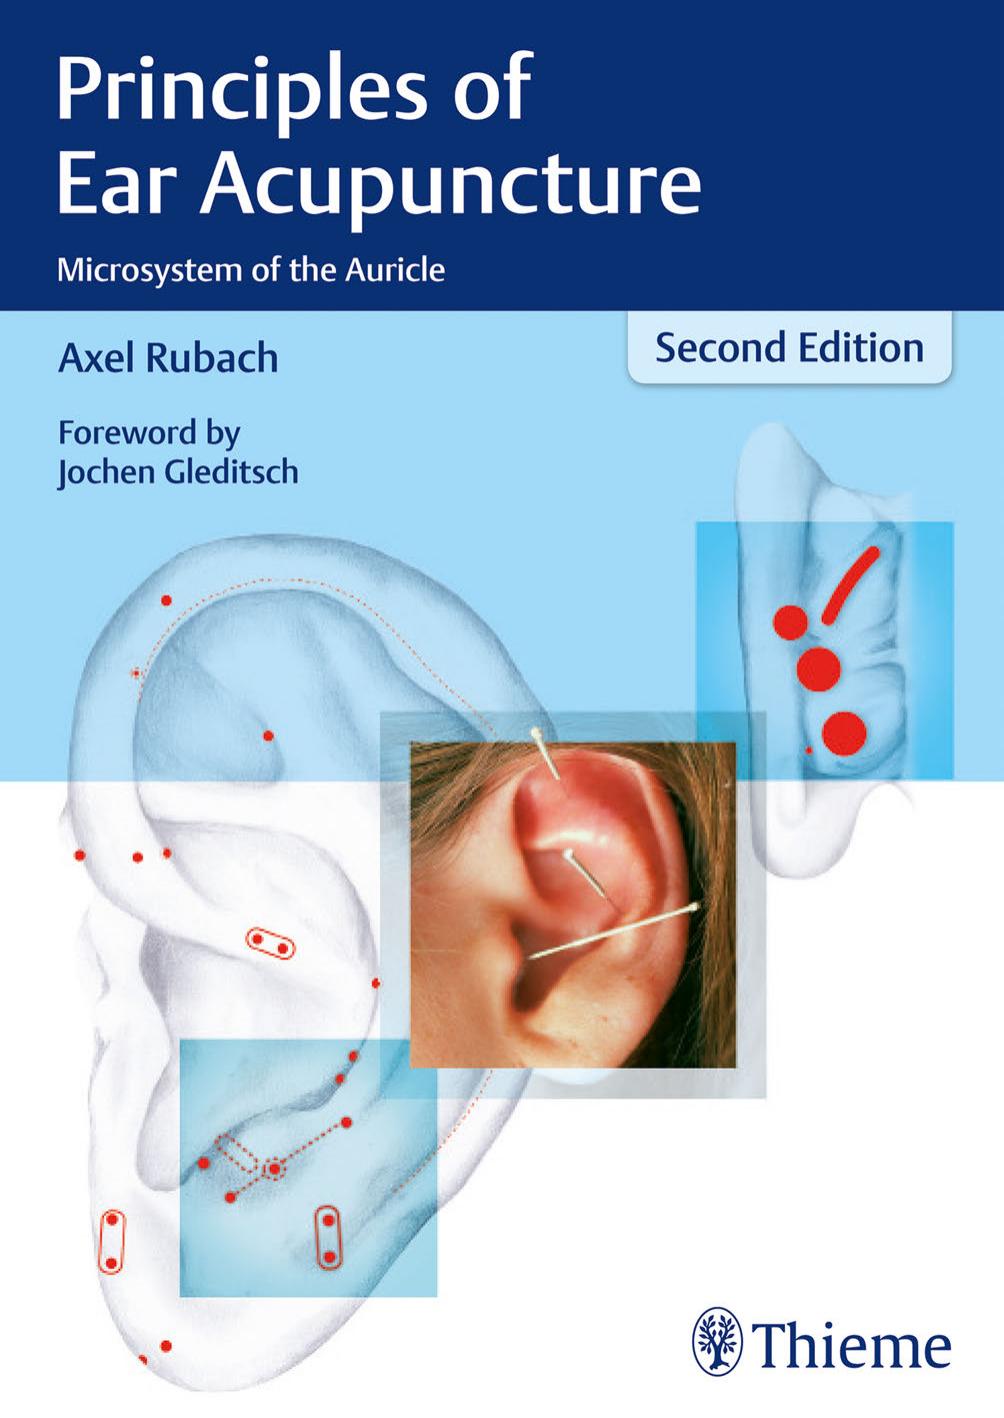 Principles of Ear Acupuncture_ Microsystem of the Auricle 2nd.jpg